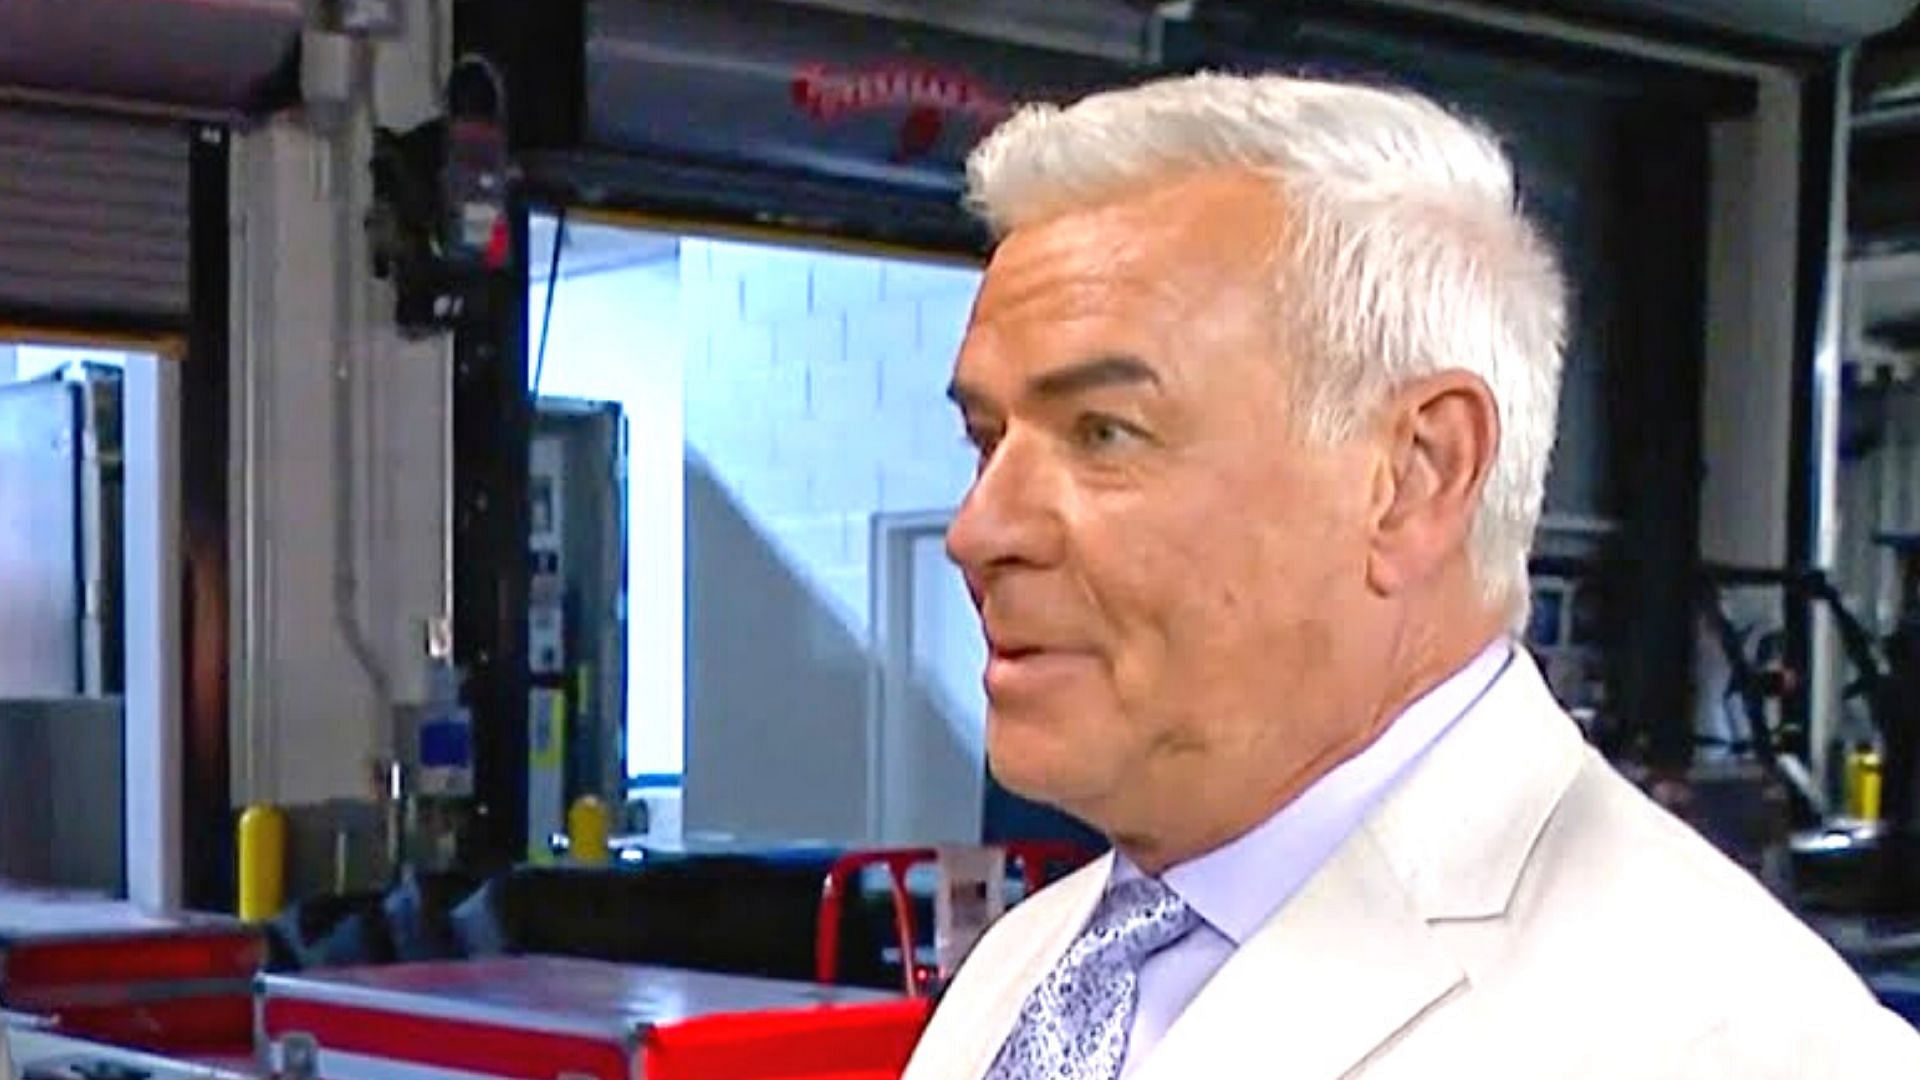 WWE Hall of Famer Eric Bischoff returned on Monday Night RAW.